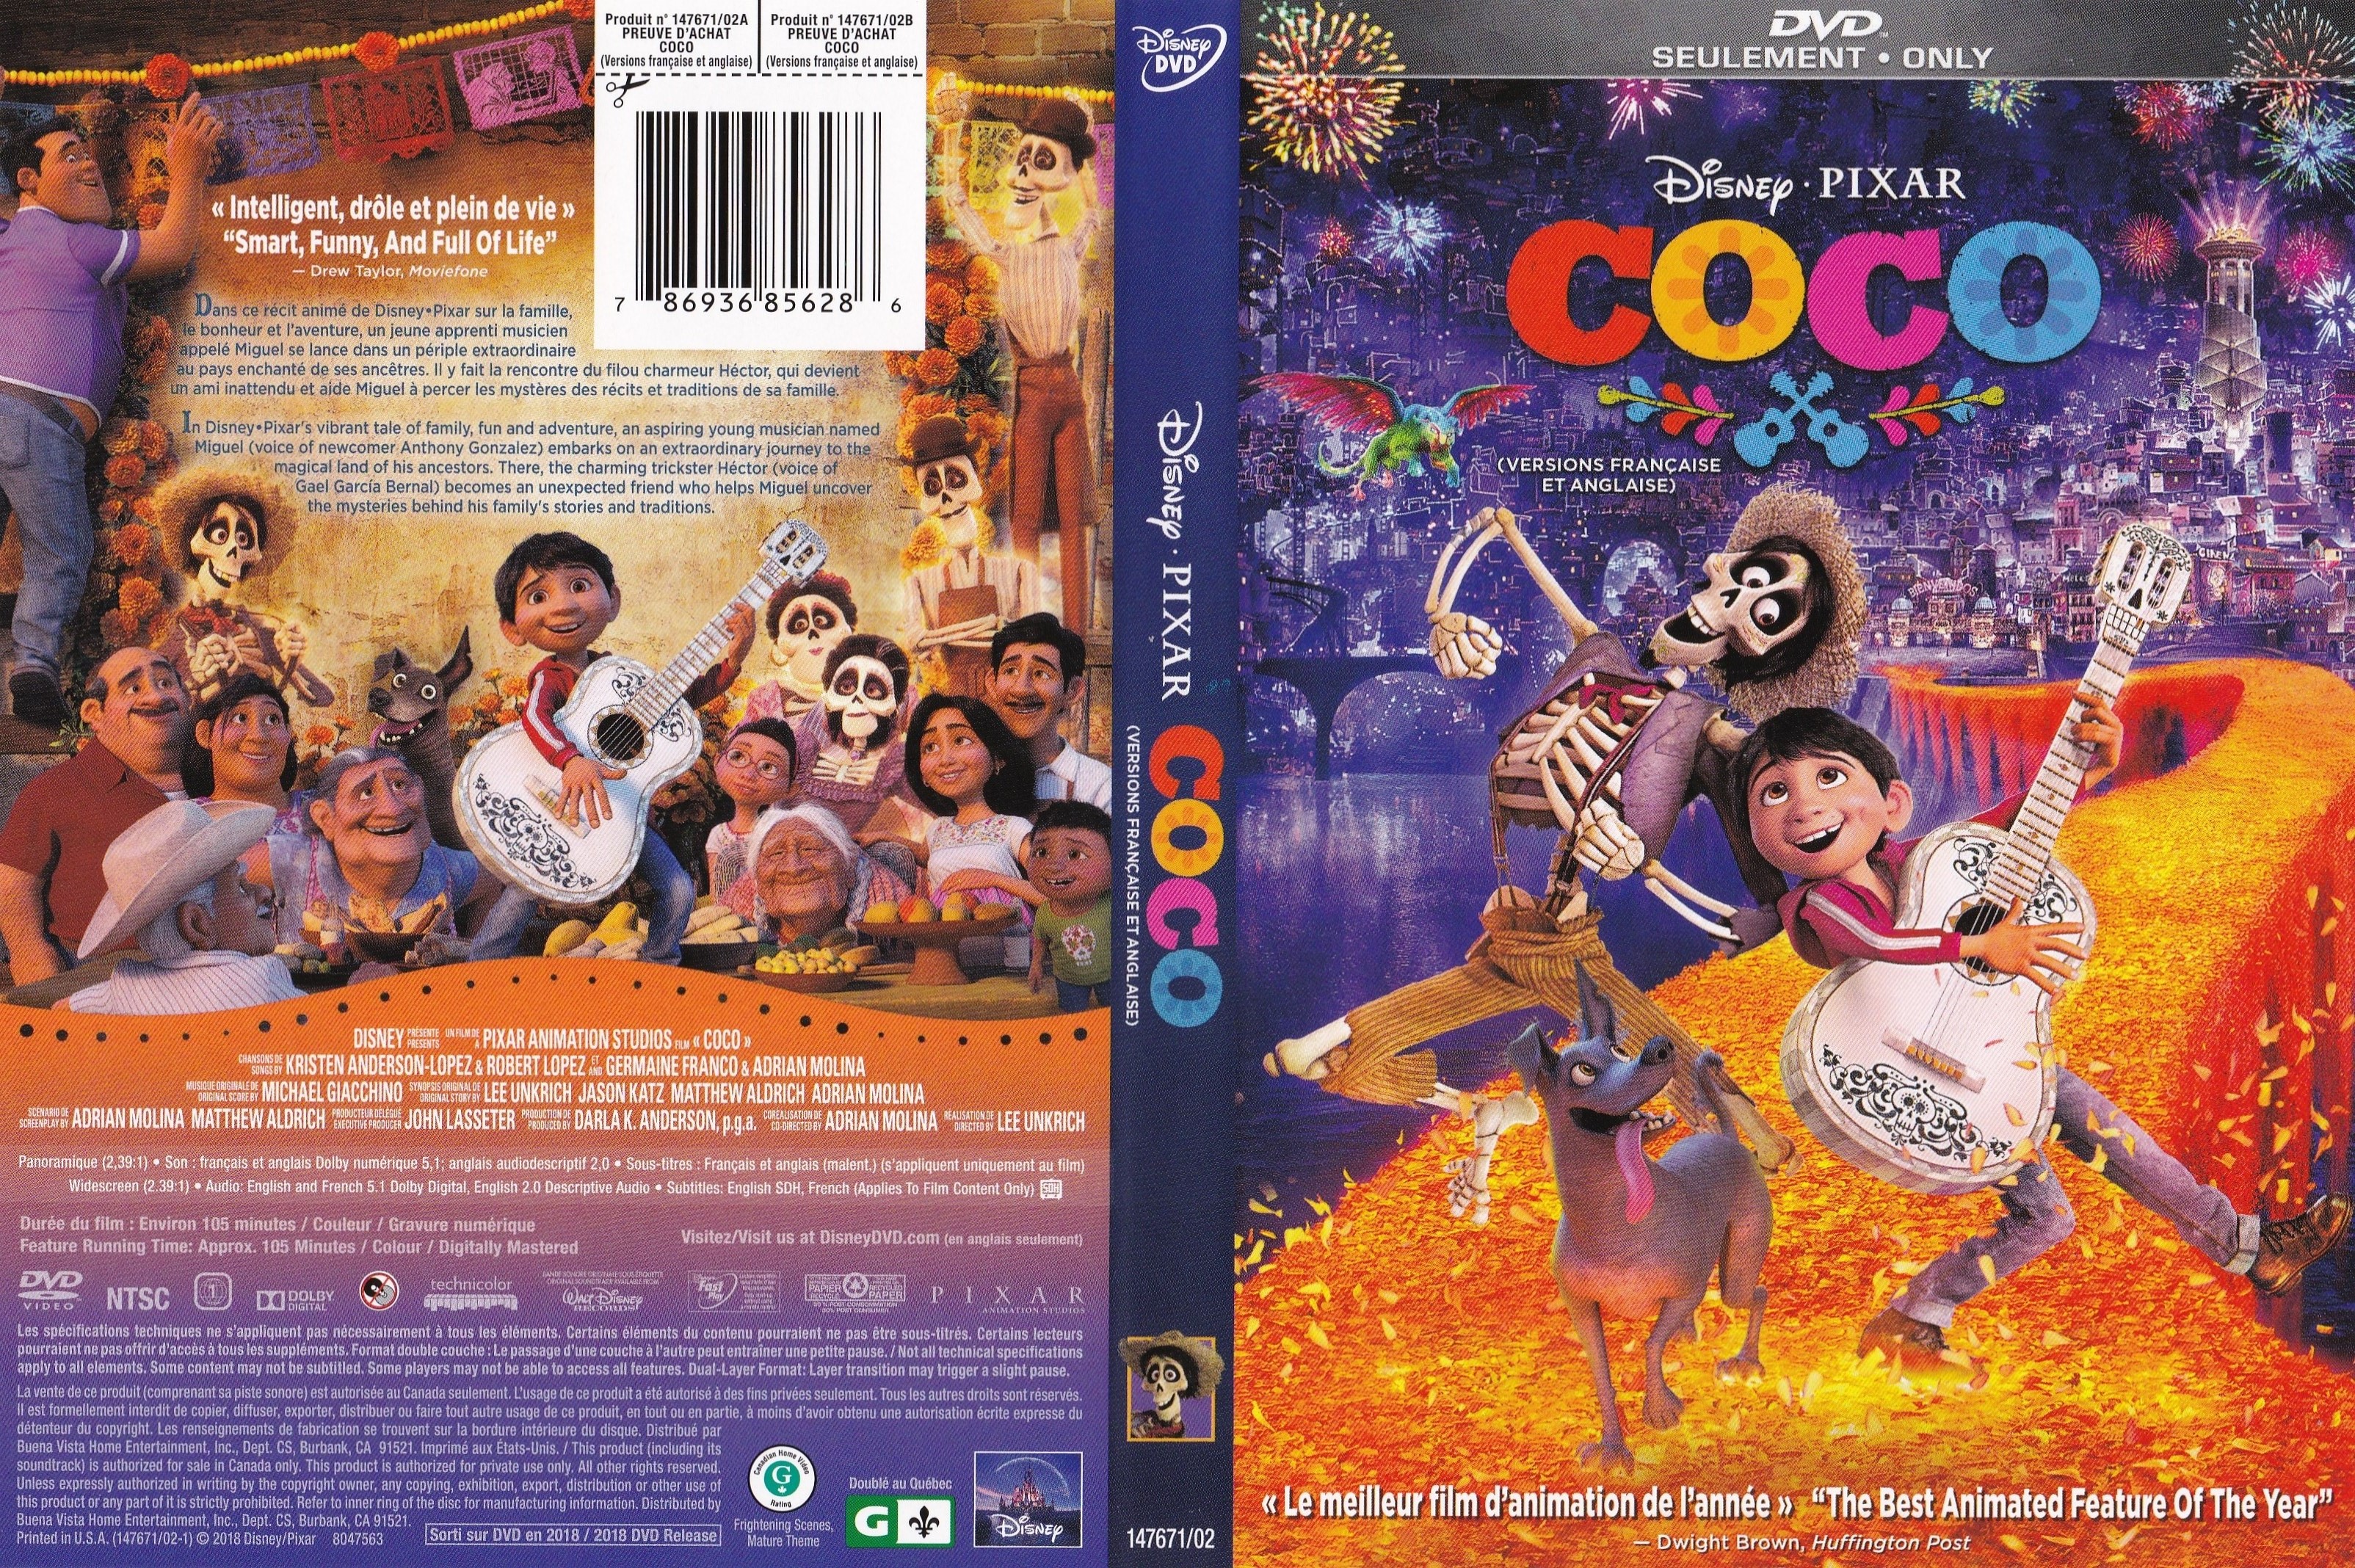 Jaquette DVD Coco (Canadienne)